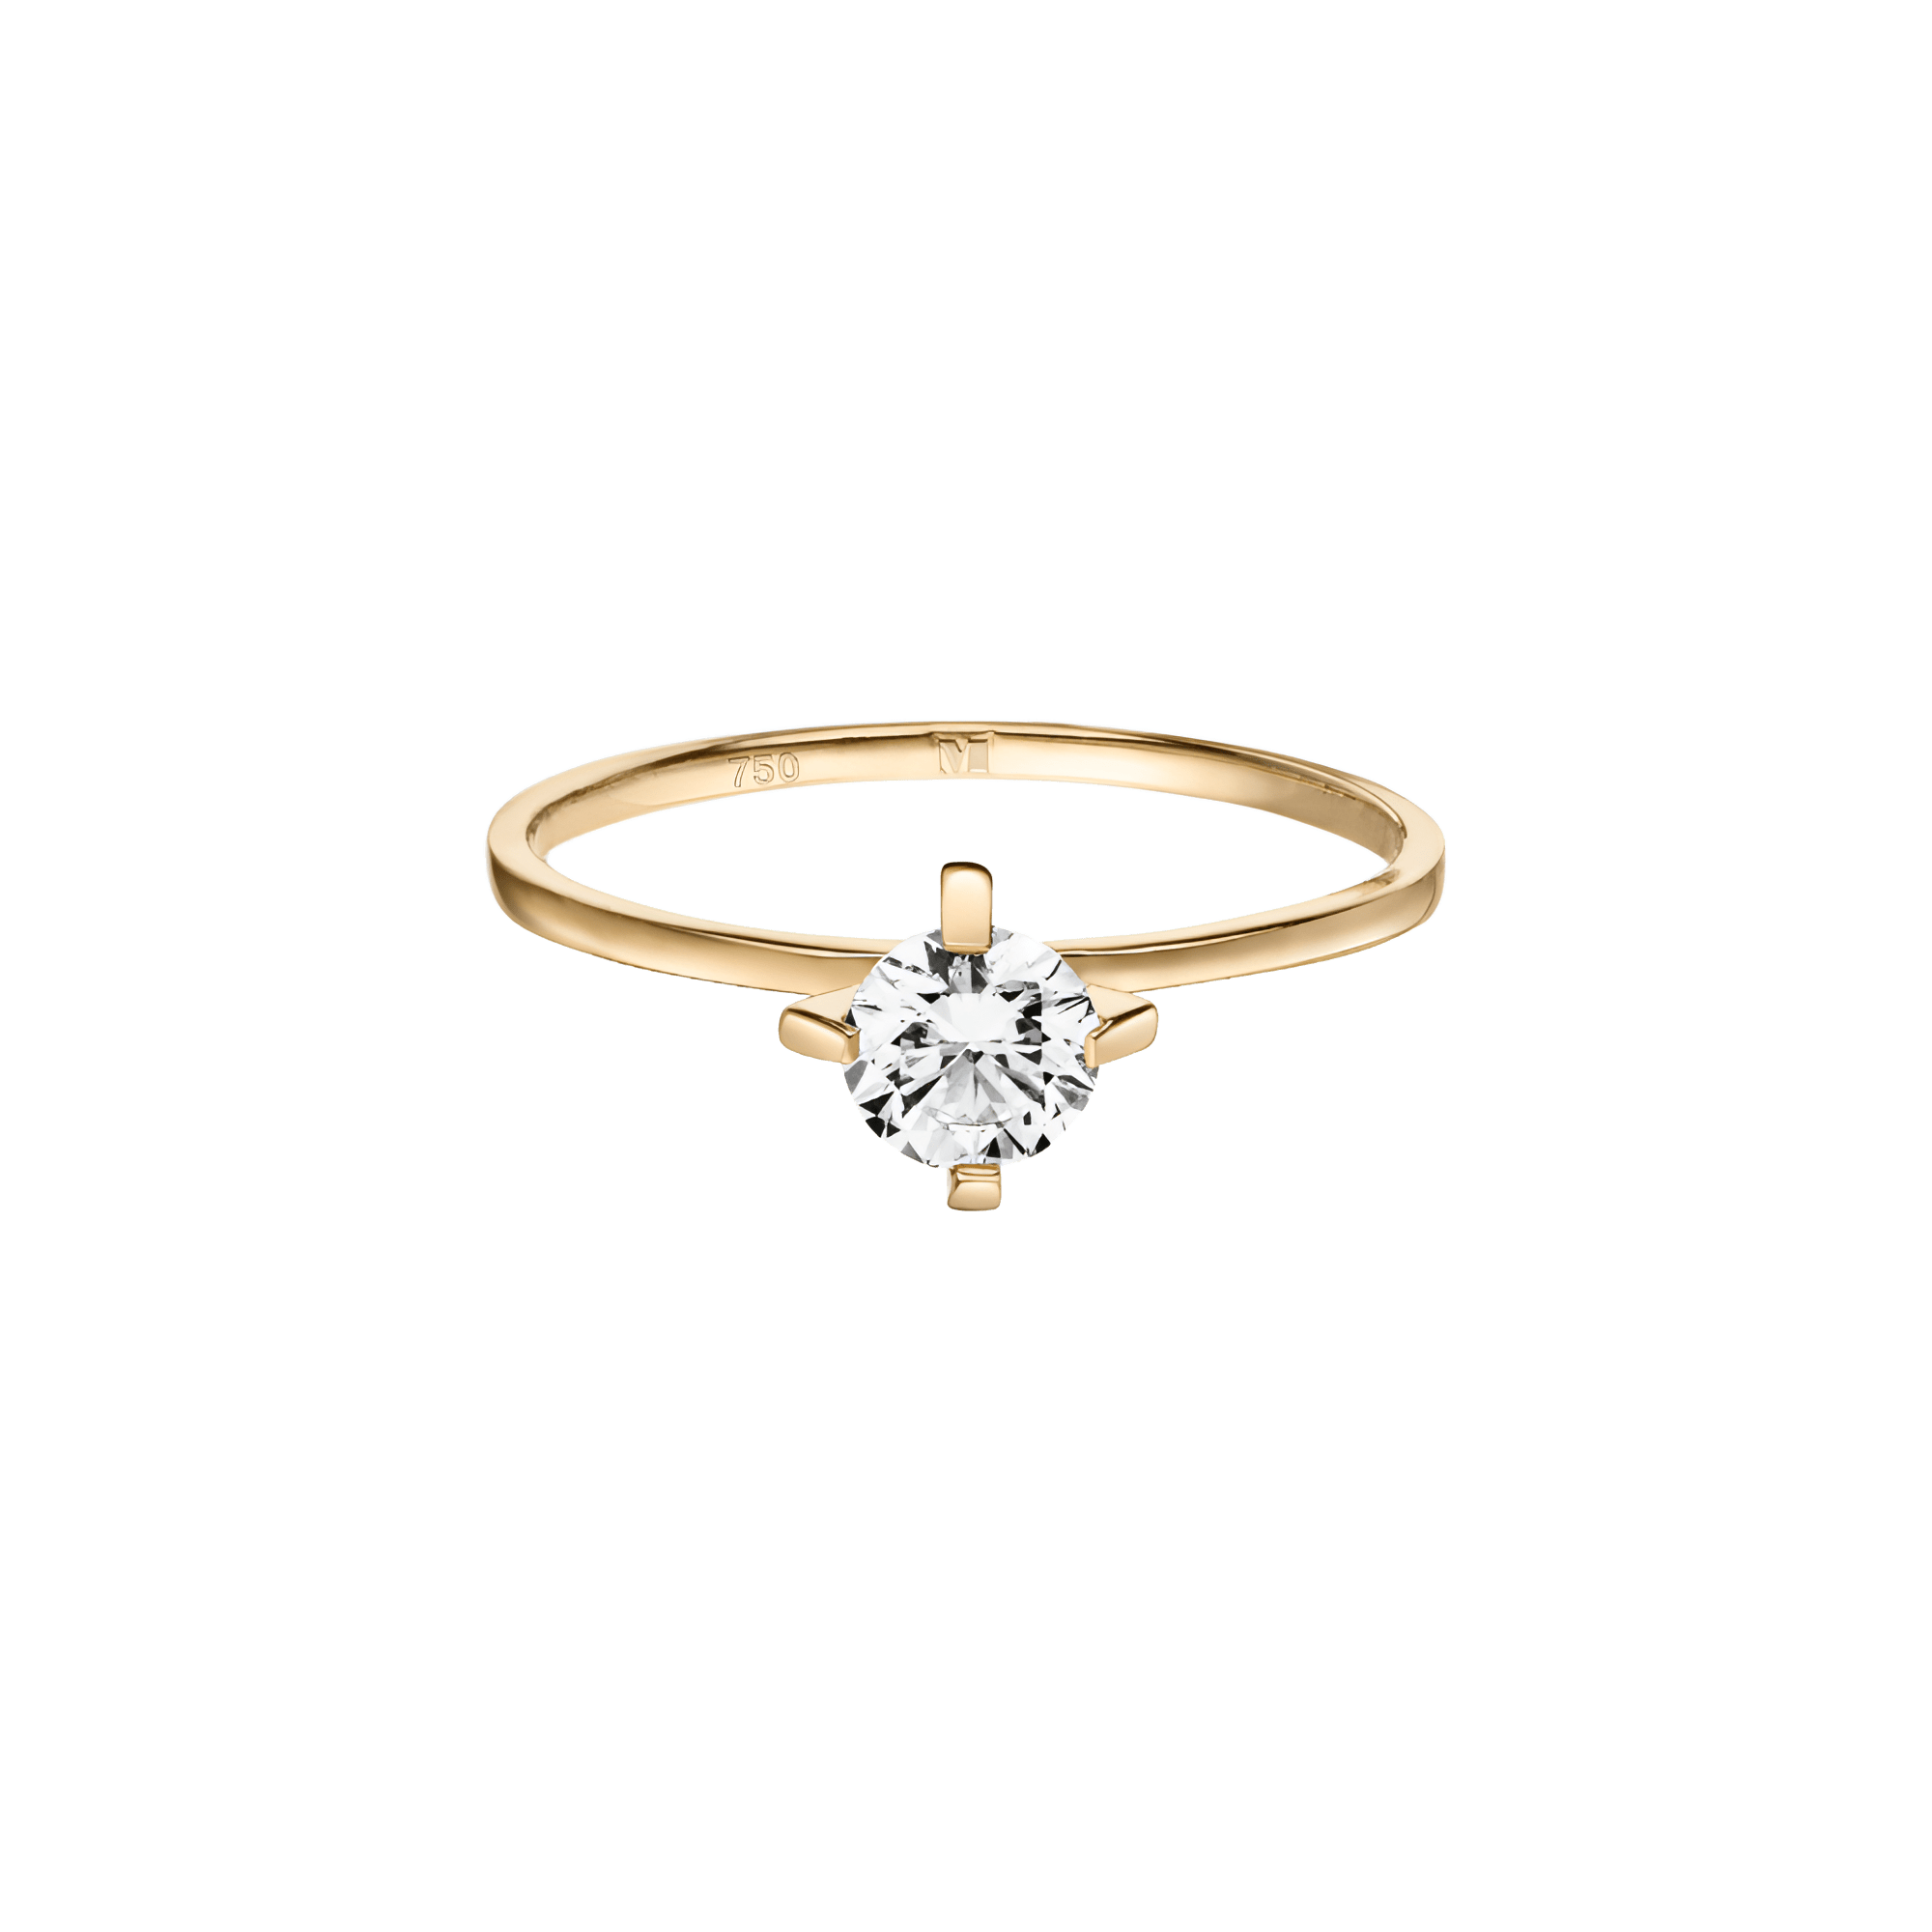 ReMind 18K Gold Lab-Grown Diamond Solitaire Ring | 18K yellow gold / 11 / 0.53ct  | Jewelry | The Future Rocks